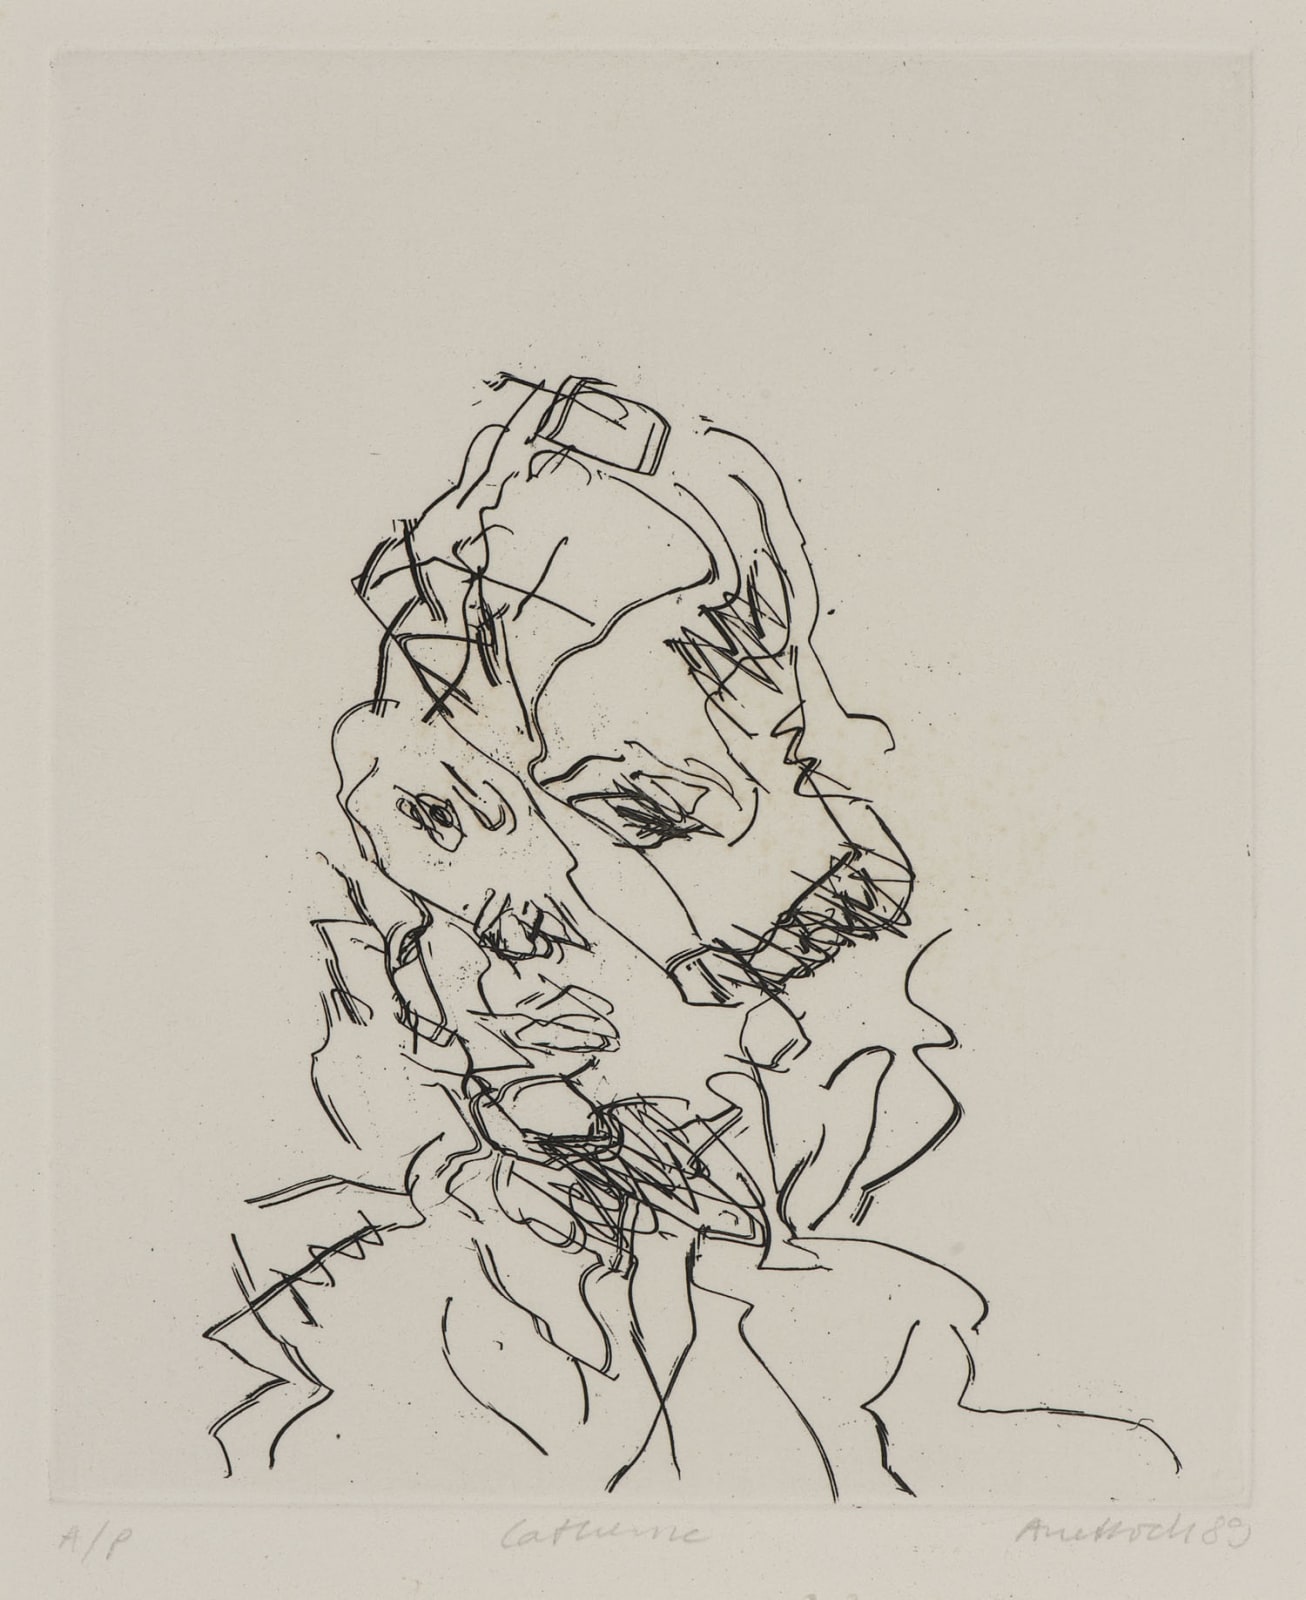 Frank Auerbach (1931-) Catherine (part of seven portraits) 1989 Etching, printed on Somerset white paper, artist's proof outside the published edition of 50 20 x 16.5 cm Ben Uri Collection © Frank Auerbach, courtesy Marlborough Fine Art To see and discover more about this artist click here